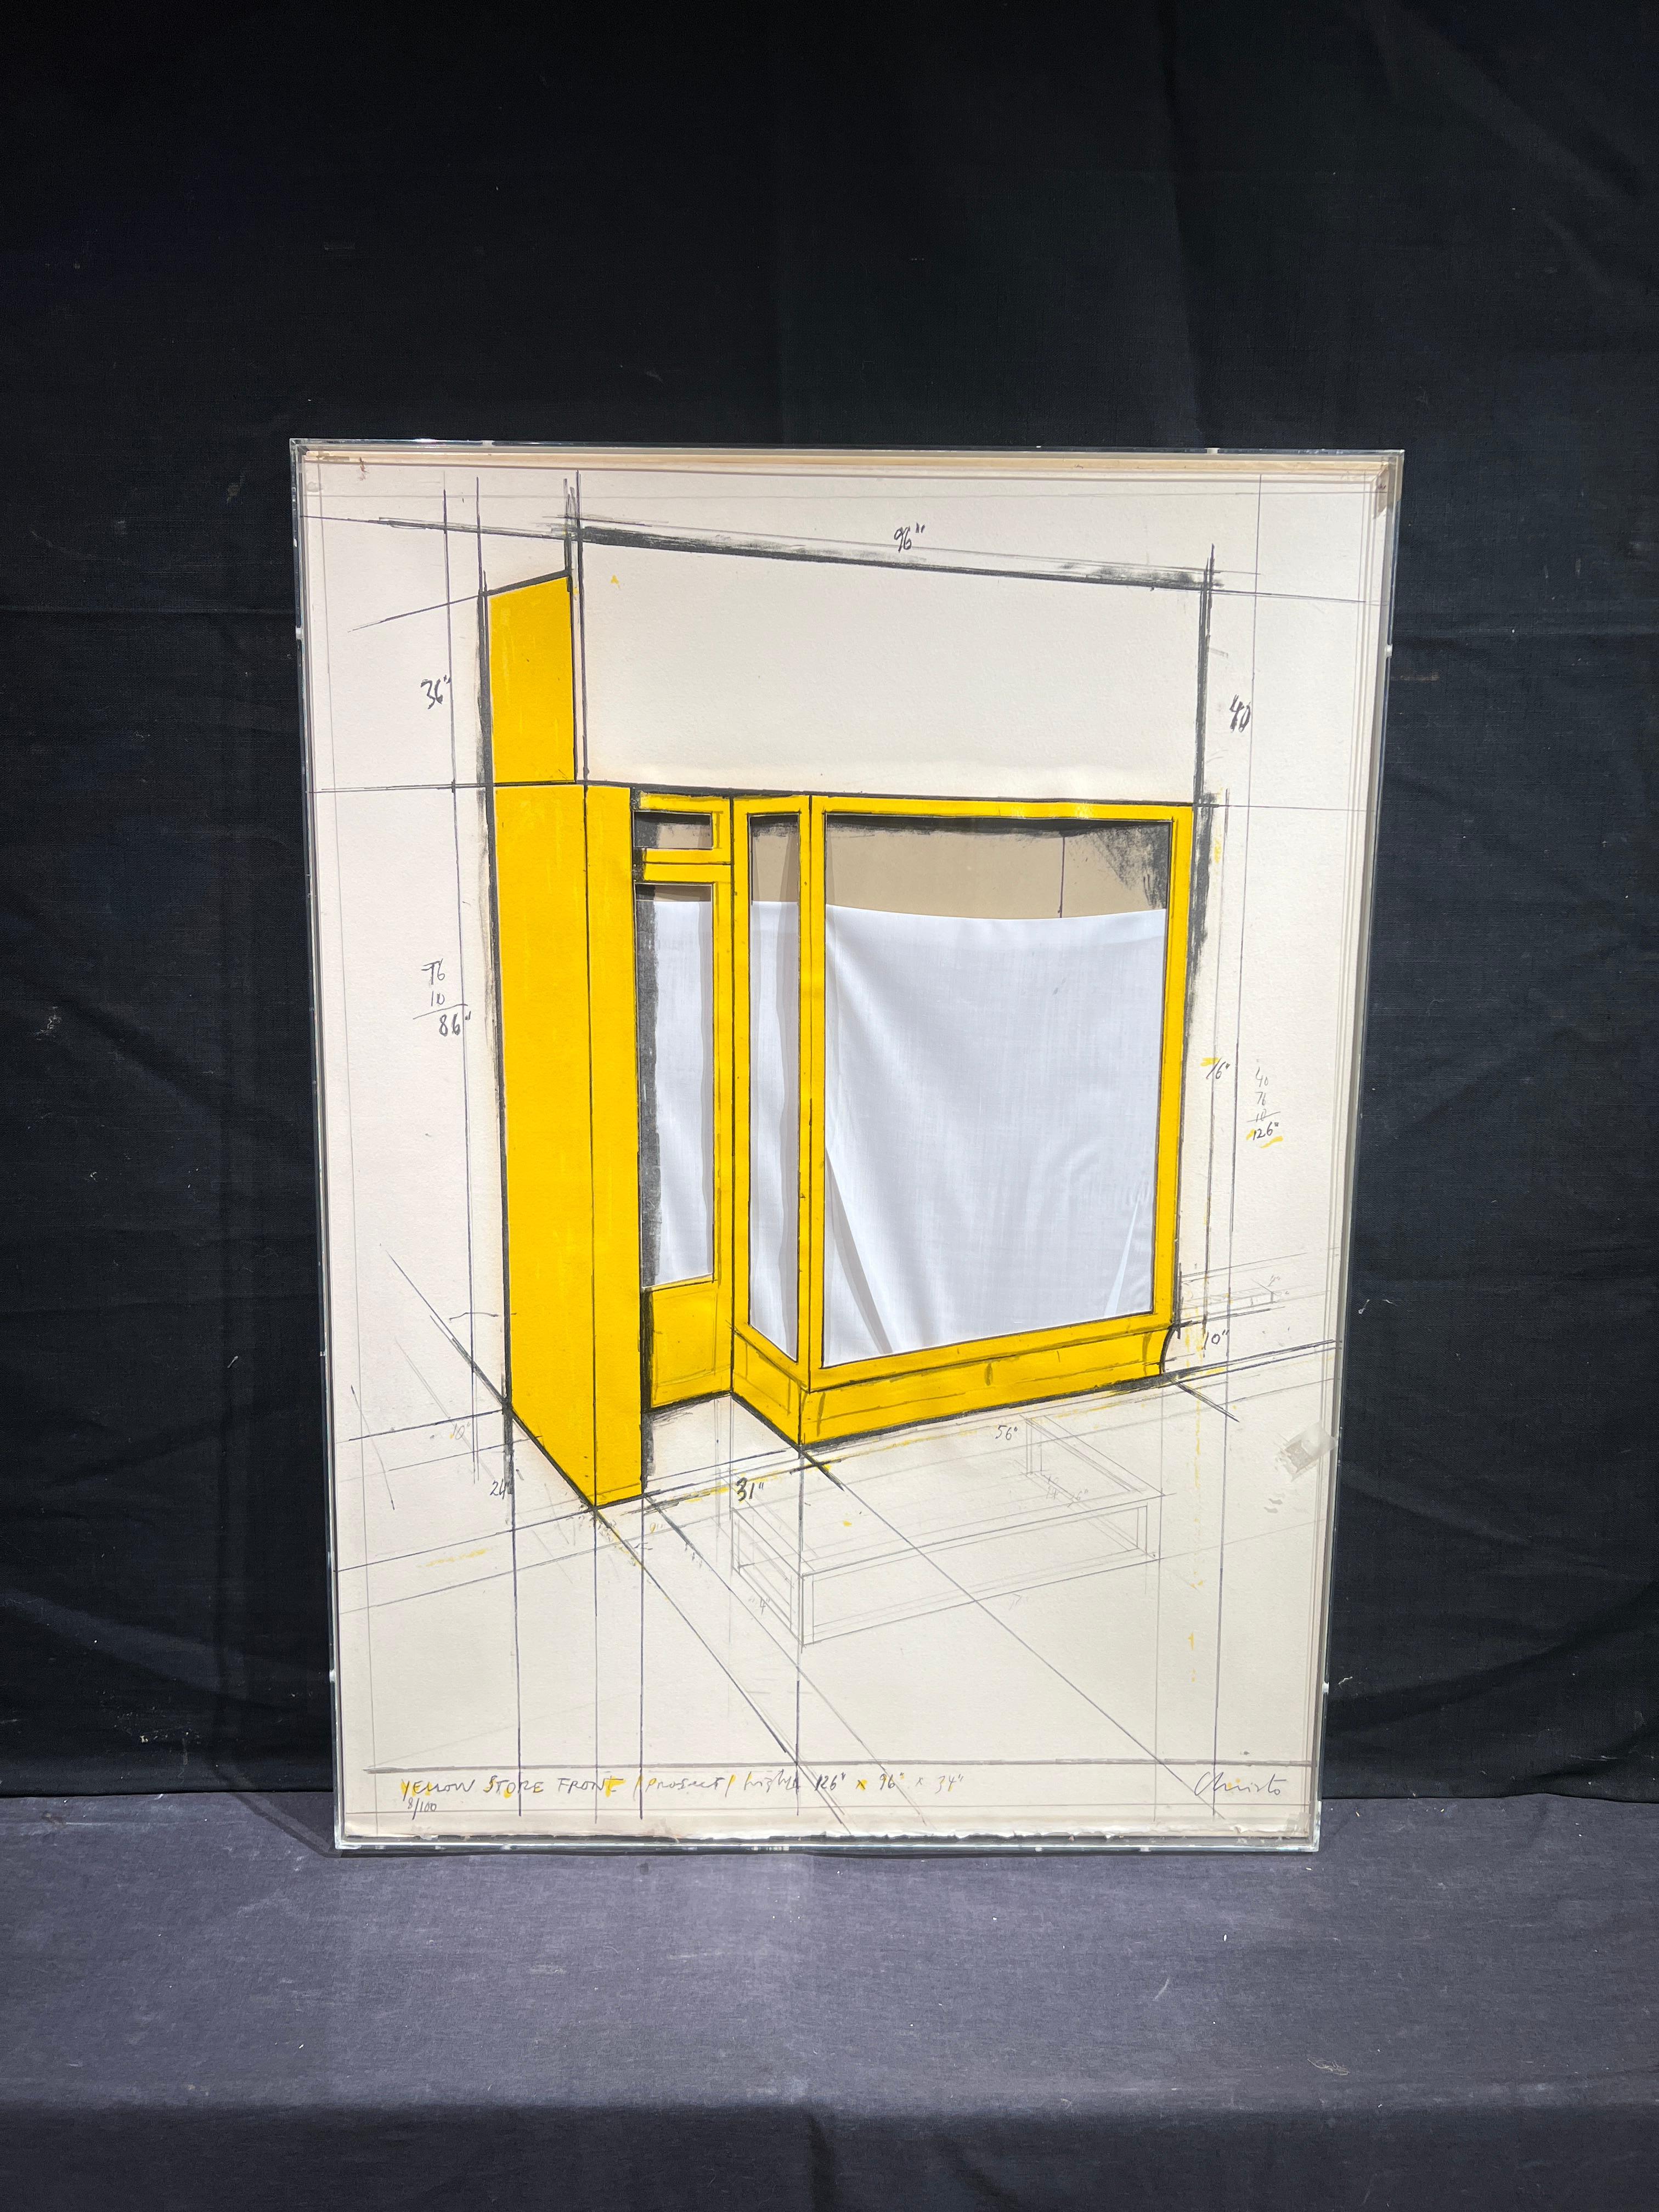 Yellow Store Front, Project, 1980
By. Christo (Bulgarian, 1935-2020)
Signed Lower Right
Titled Lower Left
Unframed: 32 x 23.5 inches
Framed: 32.5 x 24 inches

An environmental installation artist and painter of architectural landscape drawings,